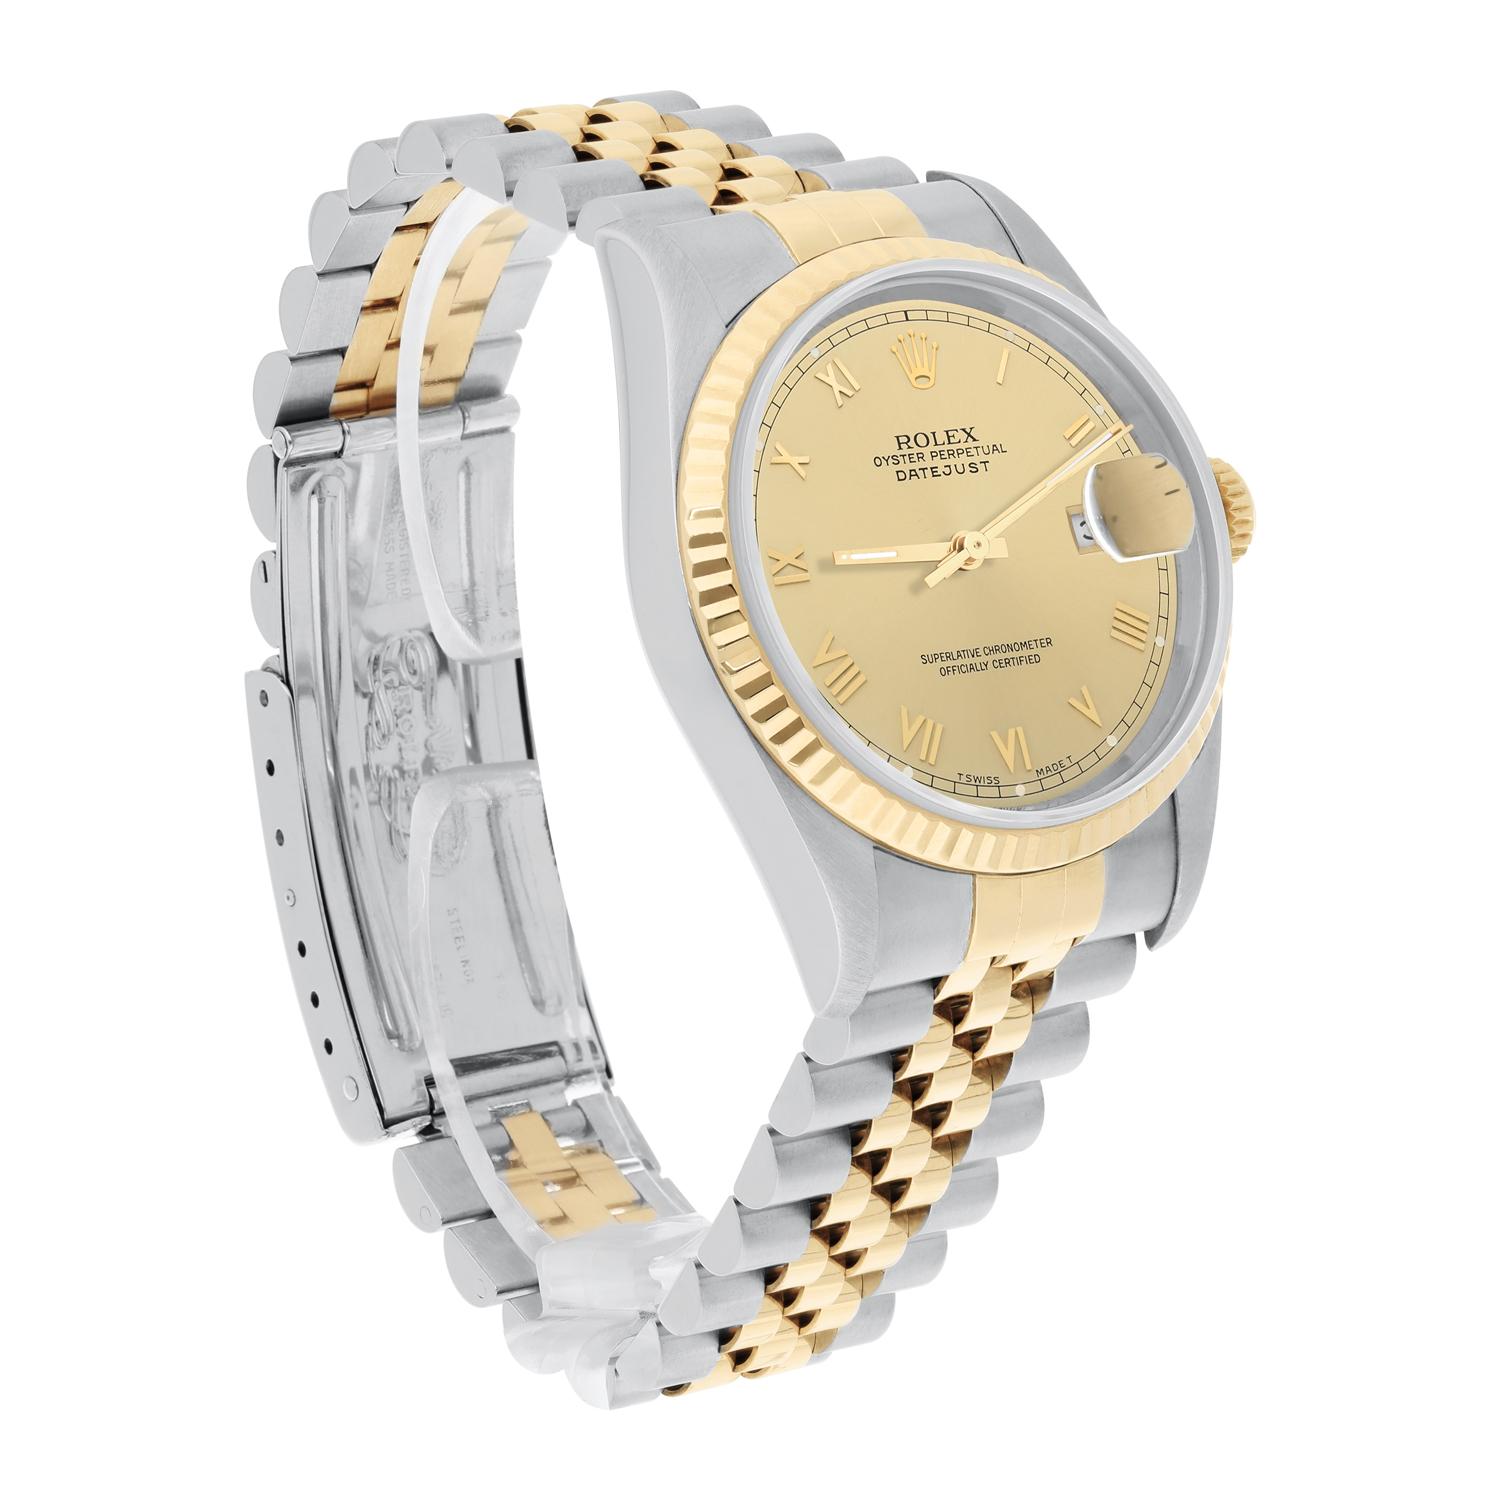 Rolex Datejust 36mm Two Tone Champagne Roman Dial Jubilee 16233 Circa 1995 For Sale 1